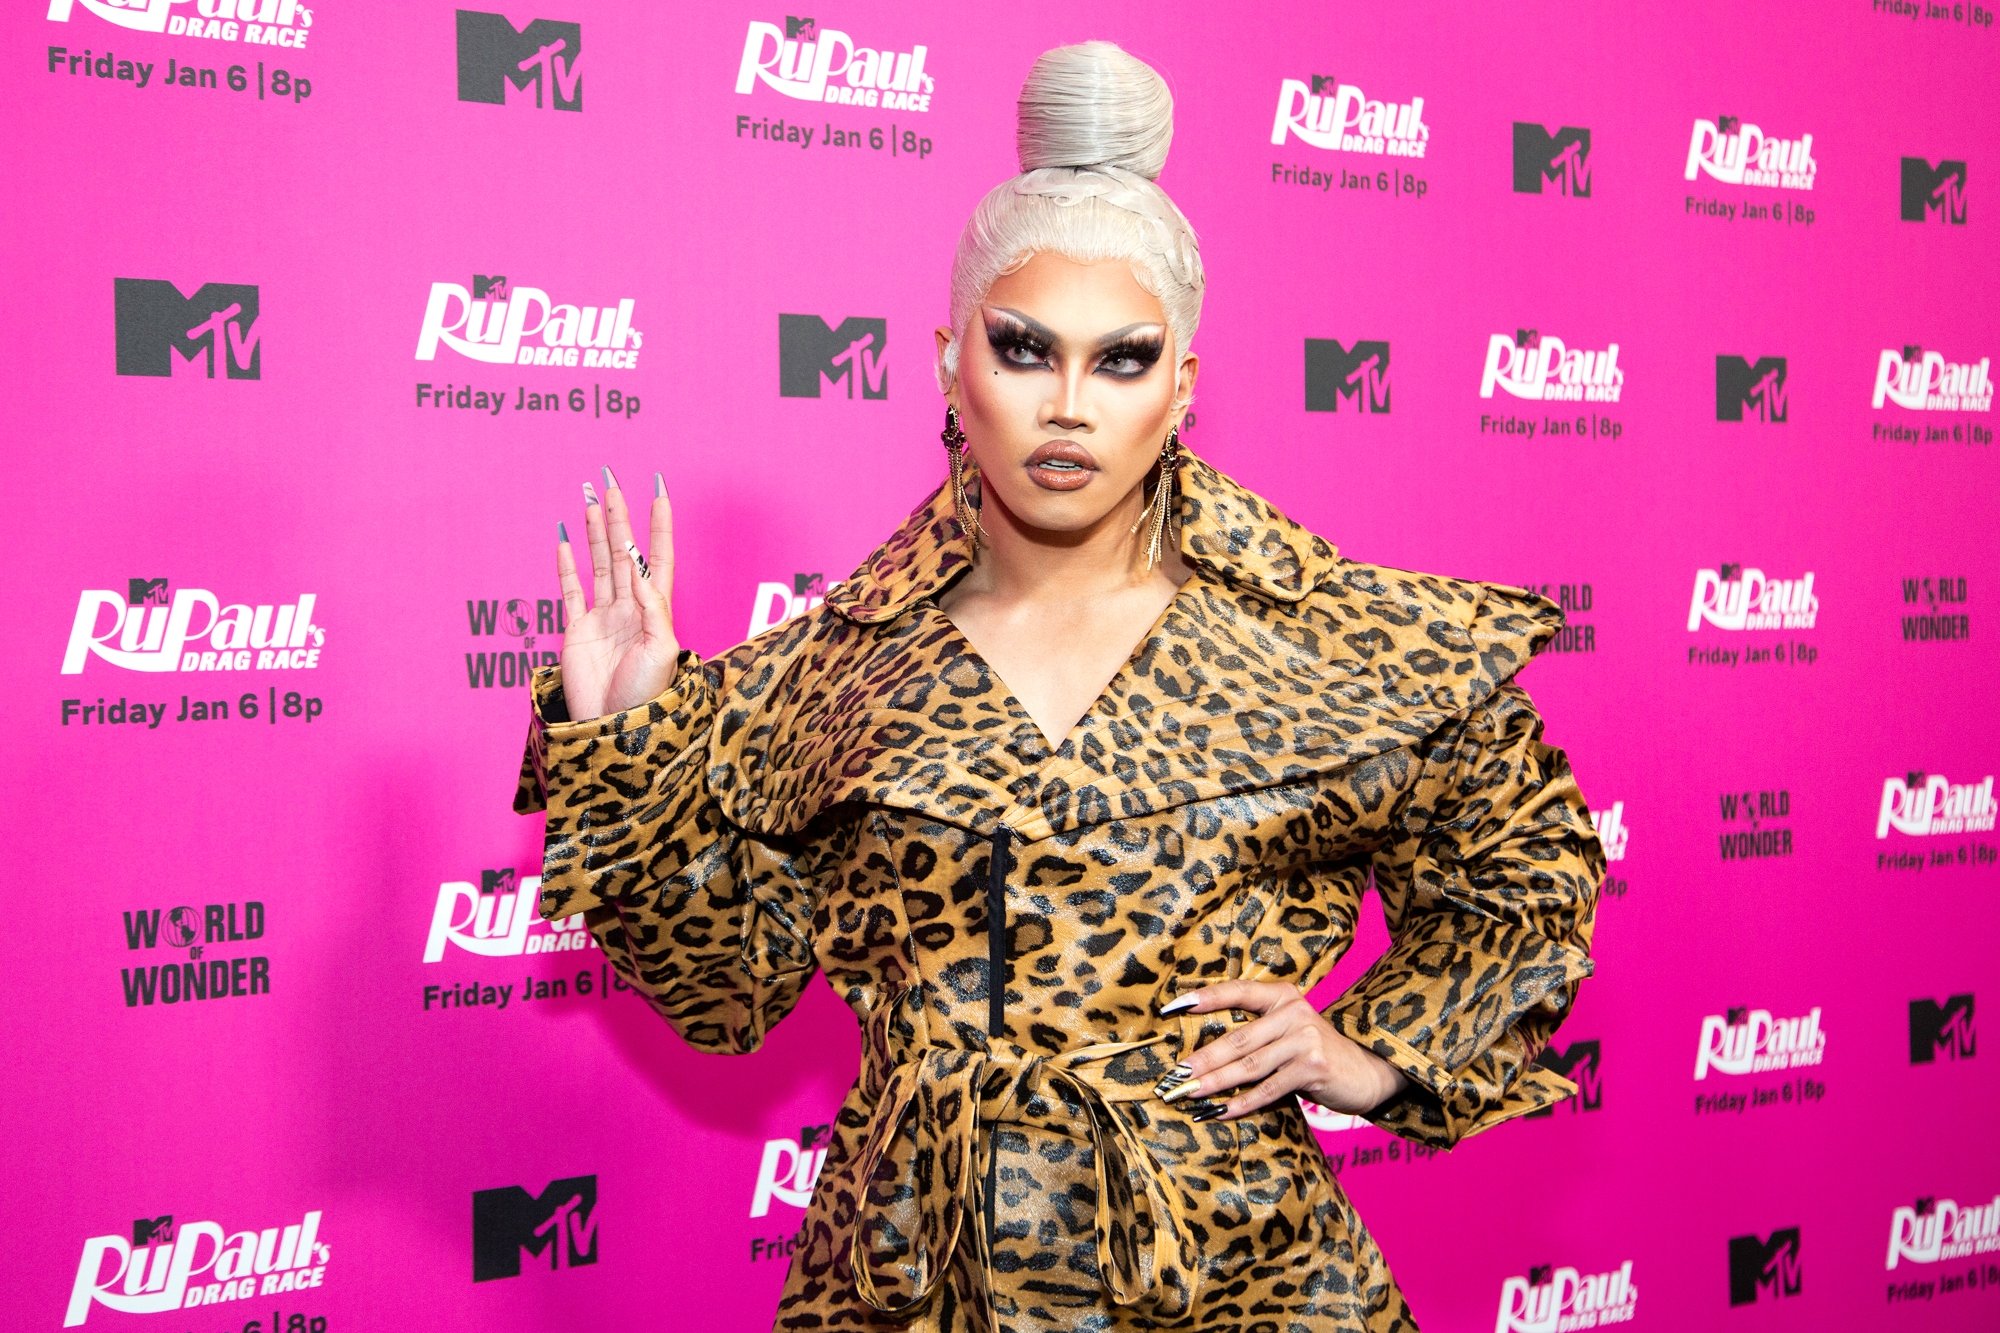 'RuPaul's Drag Race' Season 15 Aura Mayari holding her hand up in front of a pink step and repeat